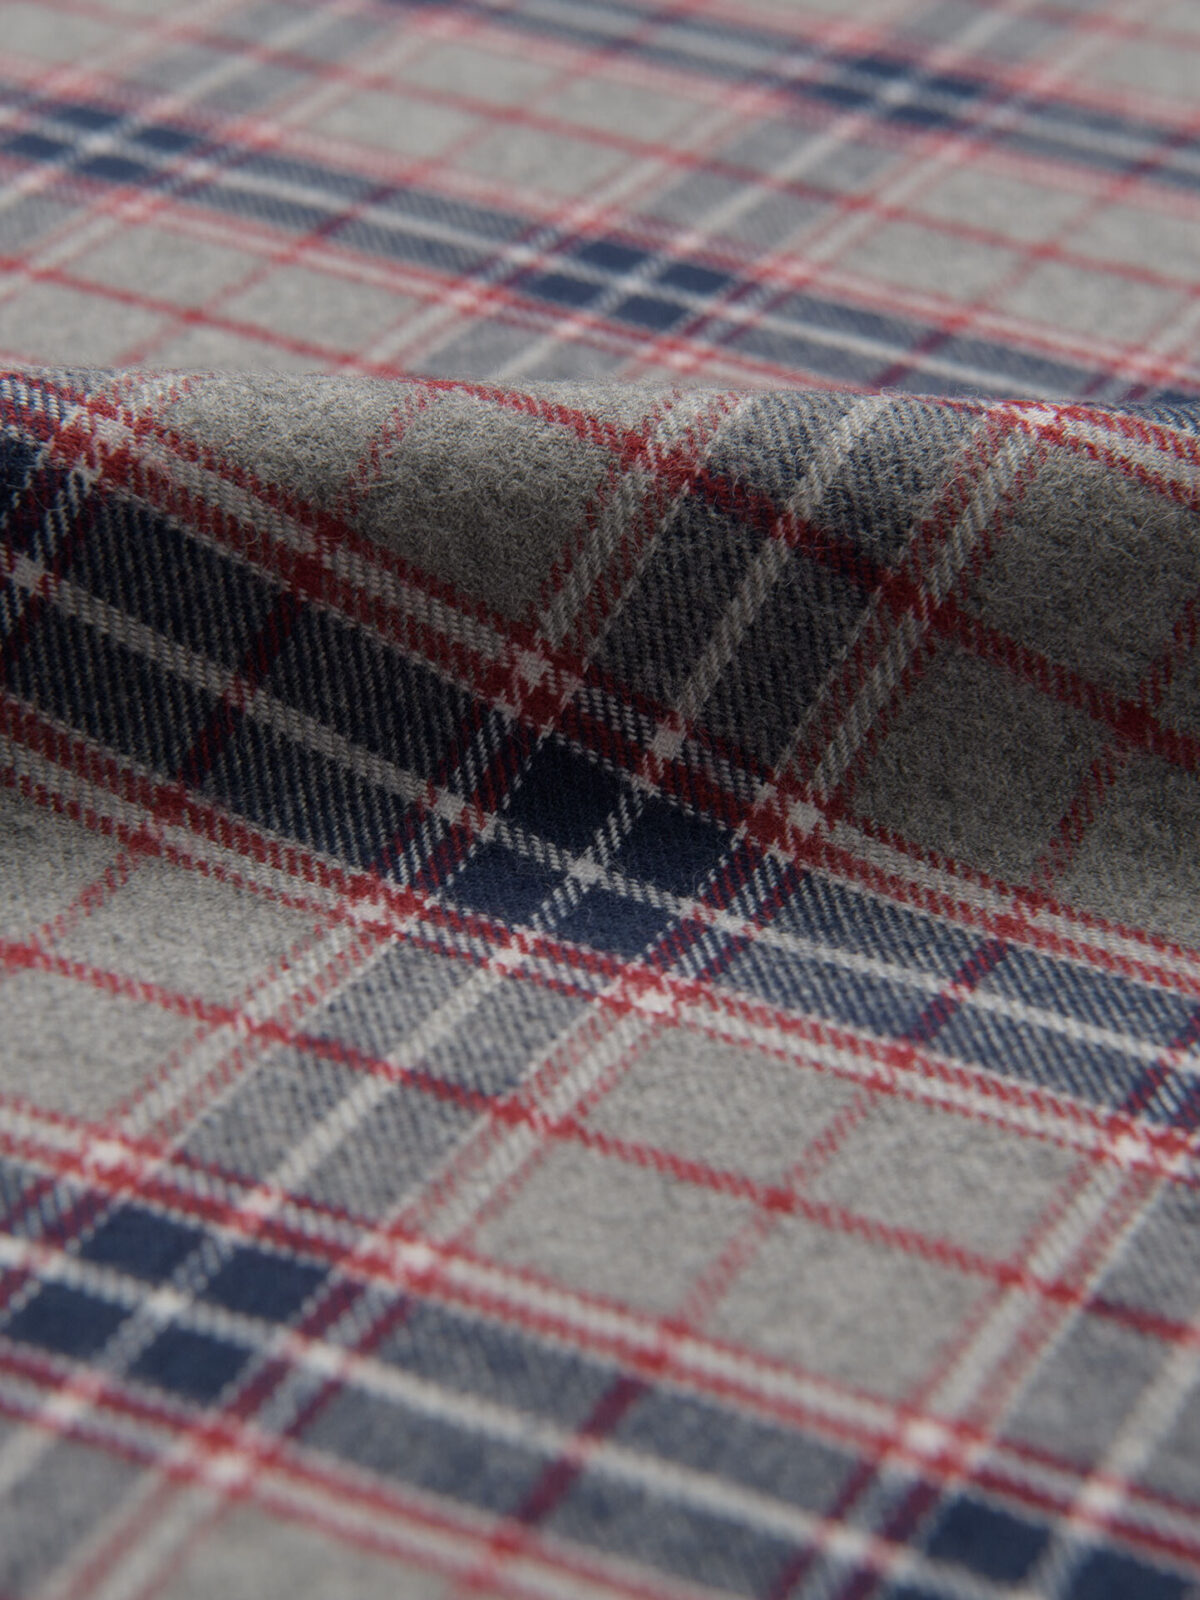 Stowe Red Navy and Grey Plaid Flannel Shirts by Proper Cloth